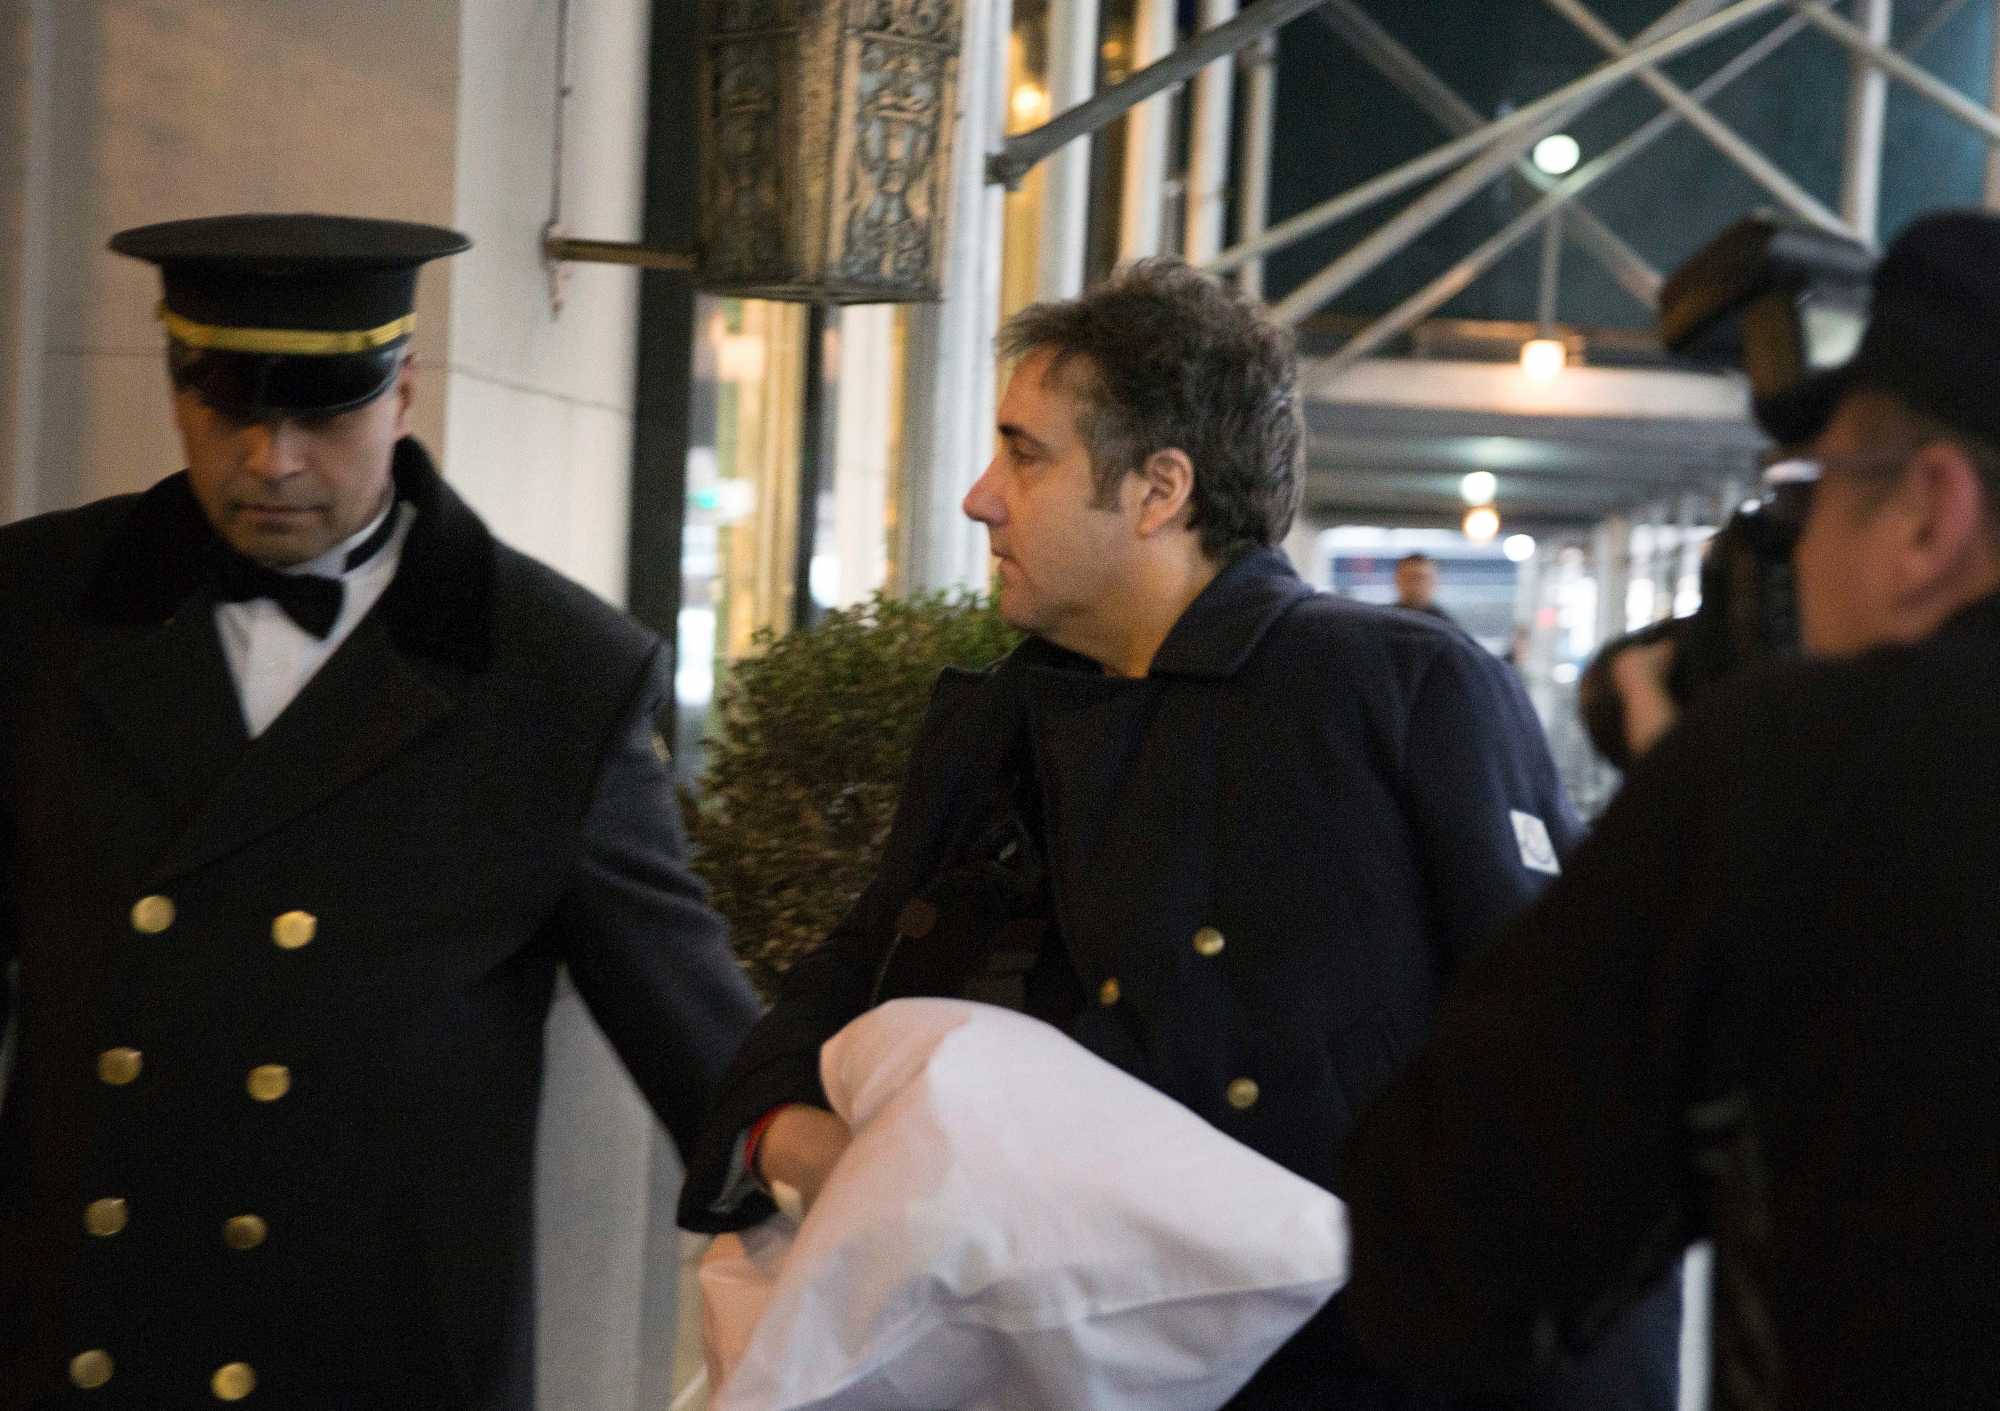 Michael Cohen arrives at his home Thursday, Jan. 18, 2019 in New York.  Democrats are vowing to investigate whether President Donald Trump directed Cohen, his personal attorney, to lie to Congress about a Moscow real estate project, calling that possibility a "concern of the greatest magnitude."  (AP Photo/Kevin Hagen) Trump Russia Probe